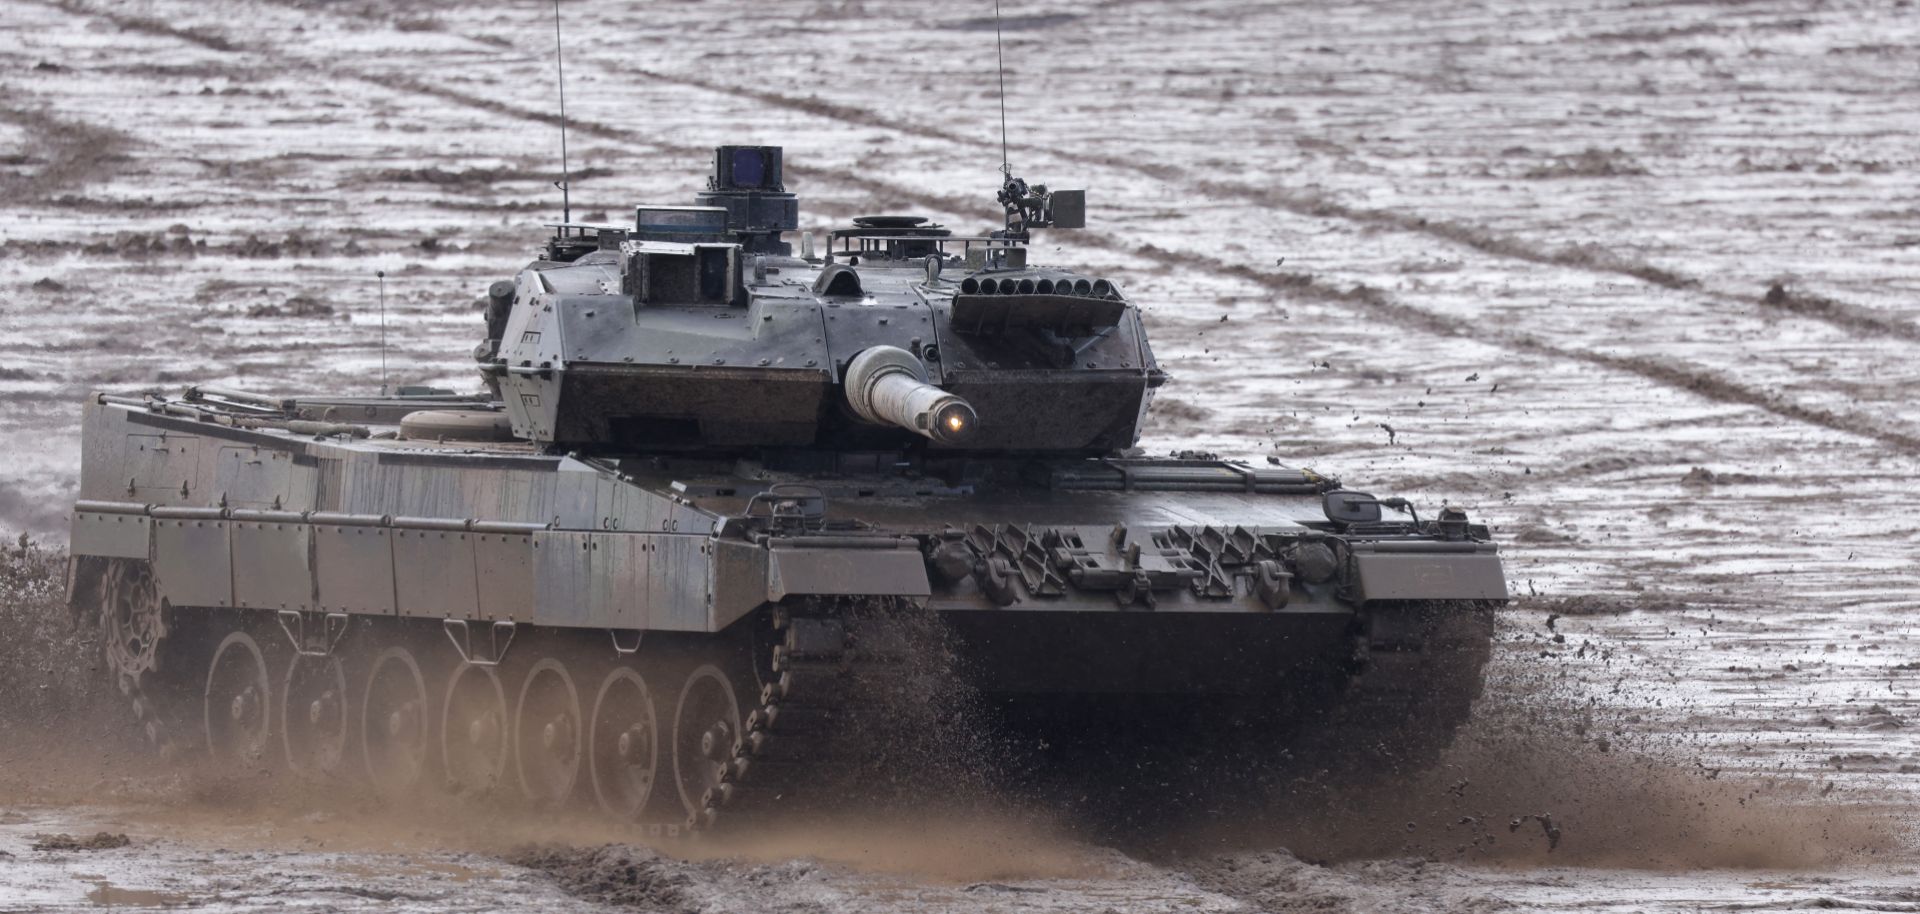 A Leopard 2 A6 heavy battle tank participates in a demonstration of capabilities during a visit by German Defence Minister Christine Lambrecht to the Bundeswehr Army training grounds on Feb. 7, 2022, in Munster, Germany. 